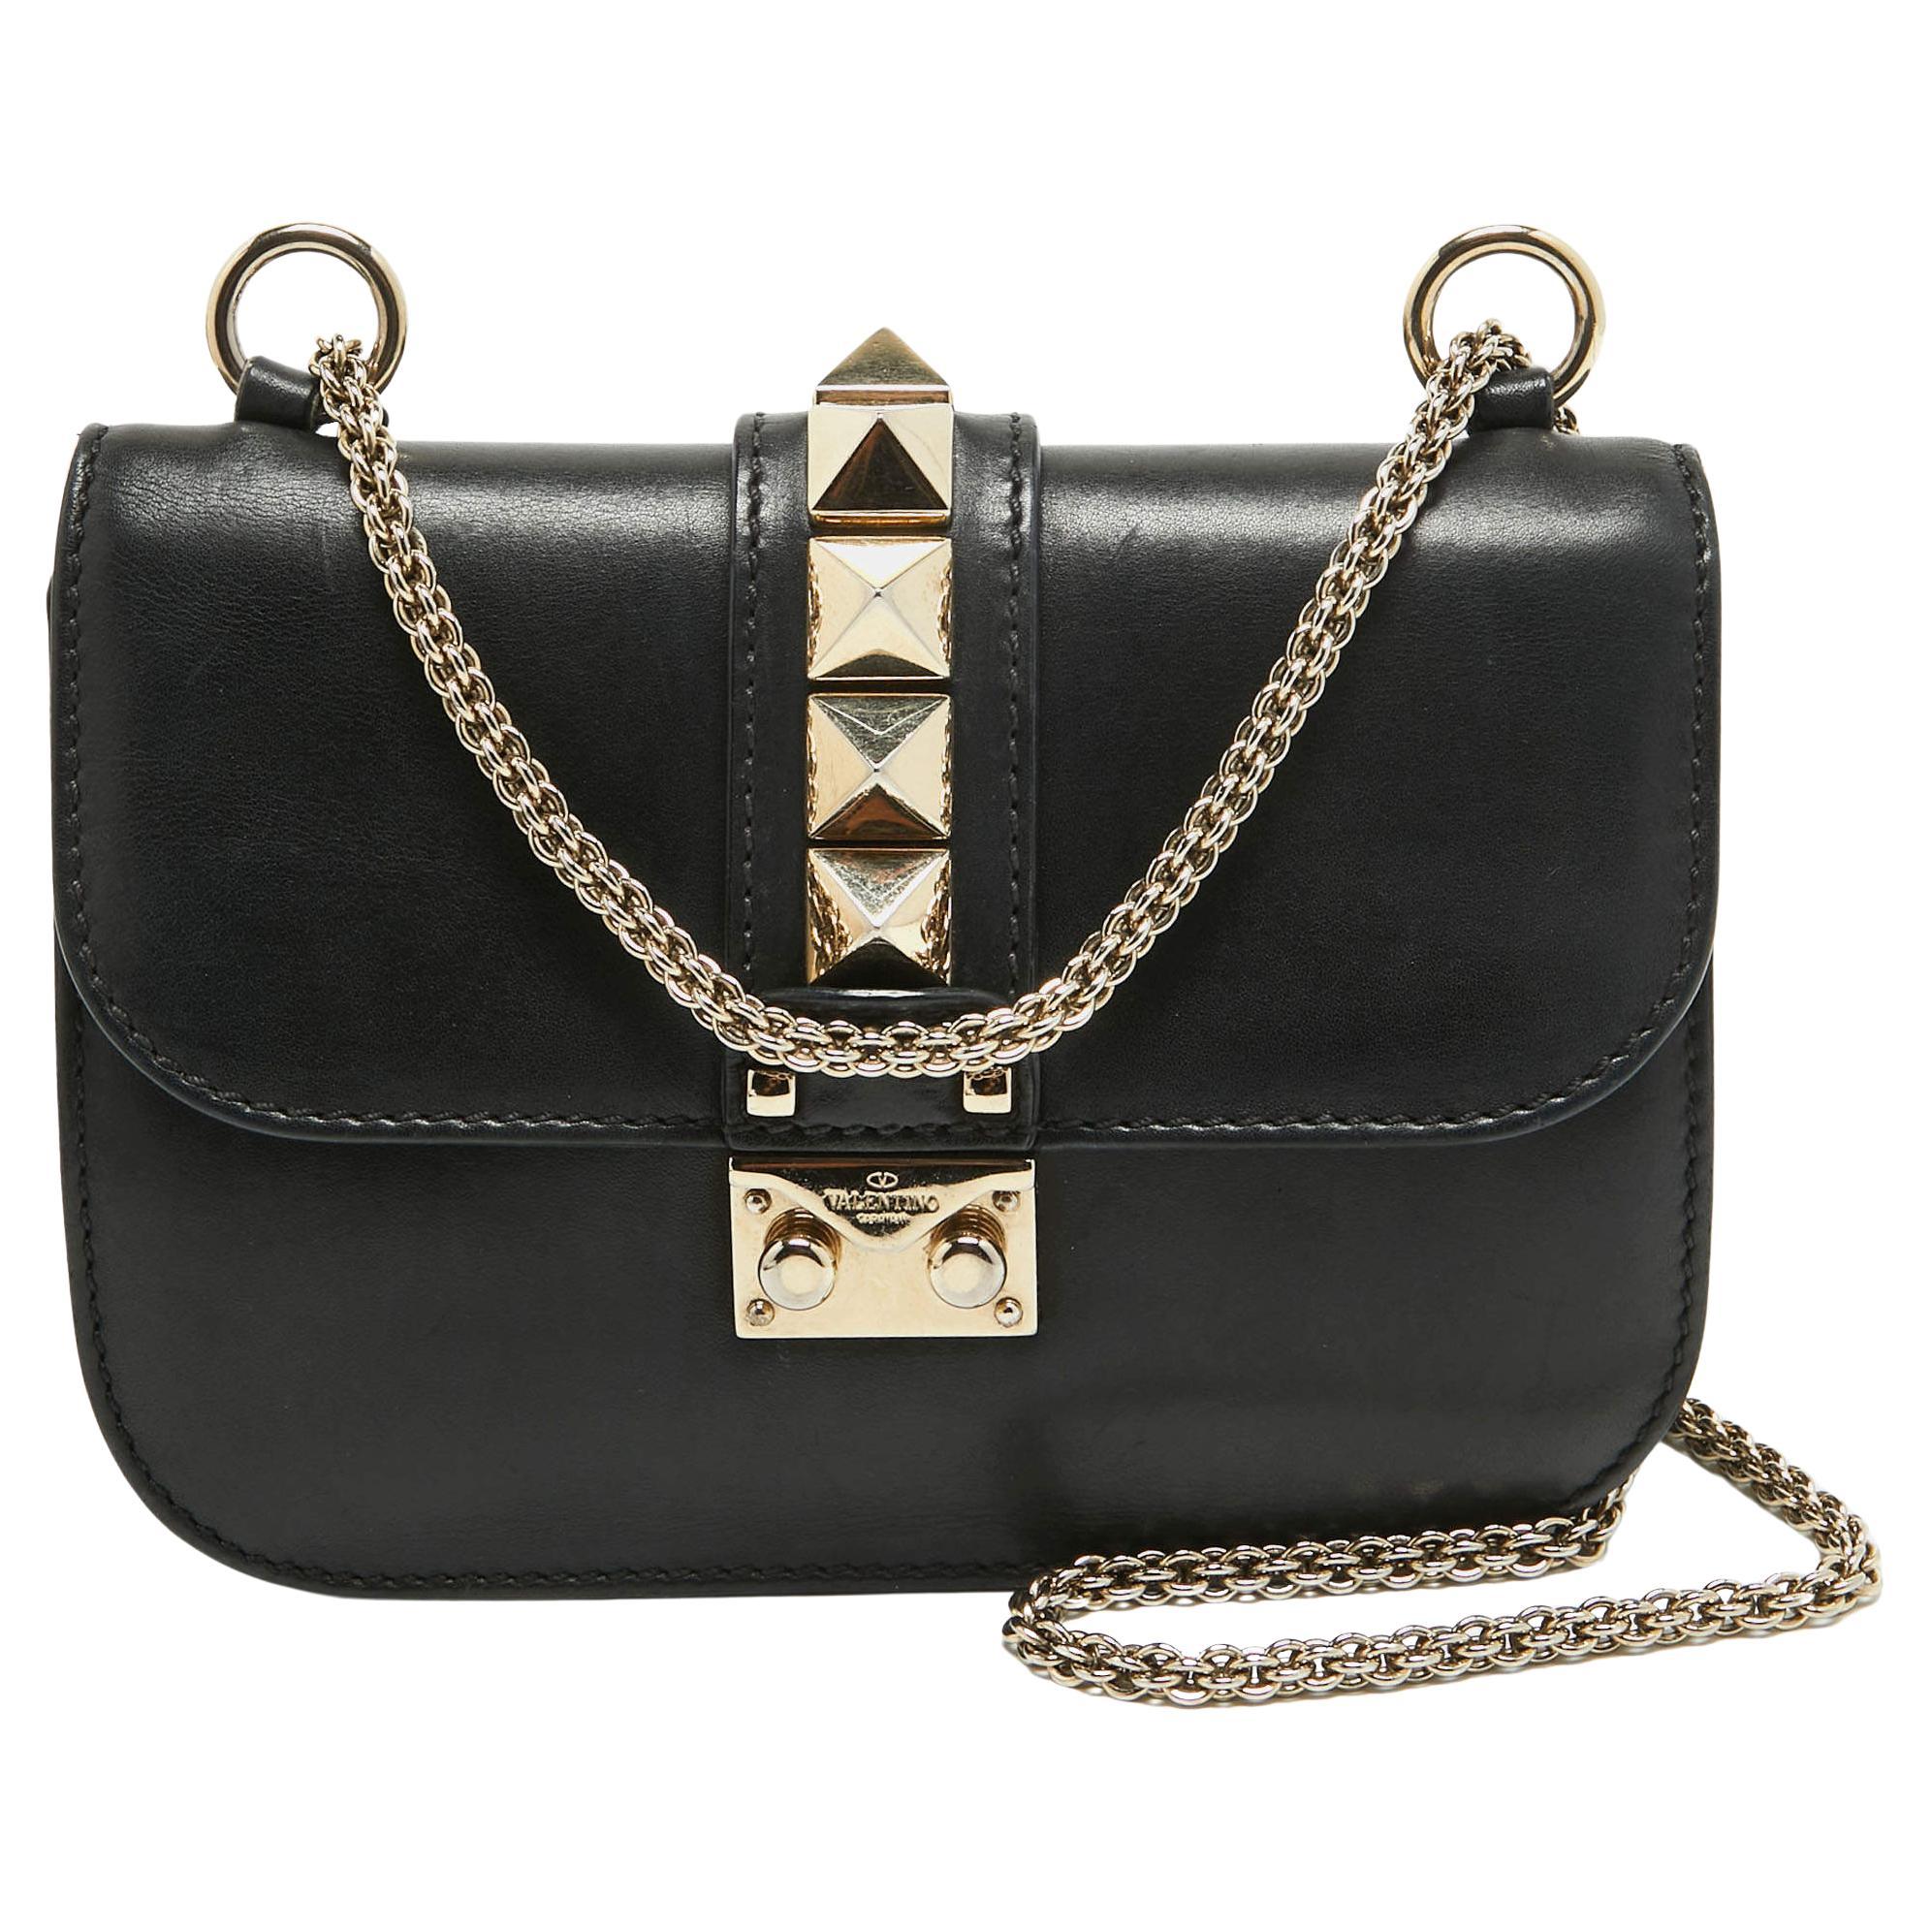 Valentino Black Leather Small Rockstud Glam Lock Flap Bag For Sale